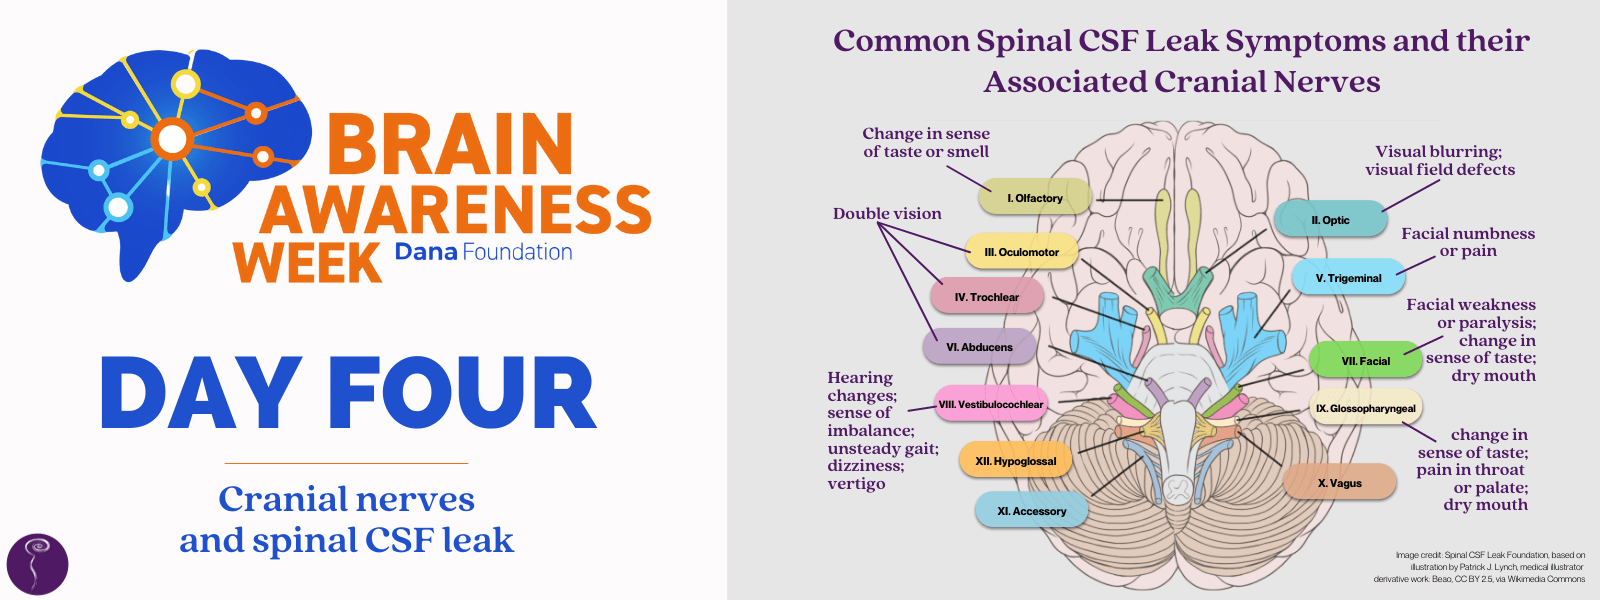 Brain awareness week day four: cranial nerves and spinal csf leak